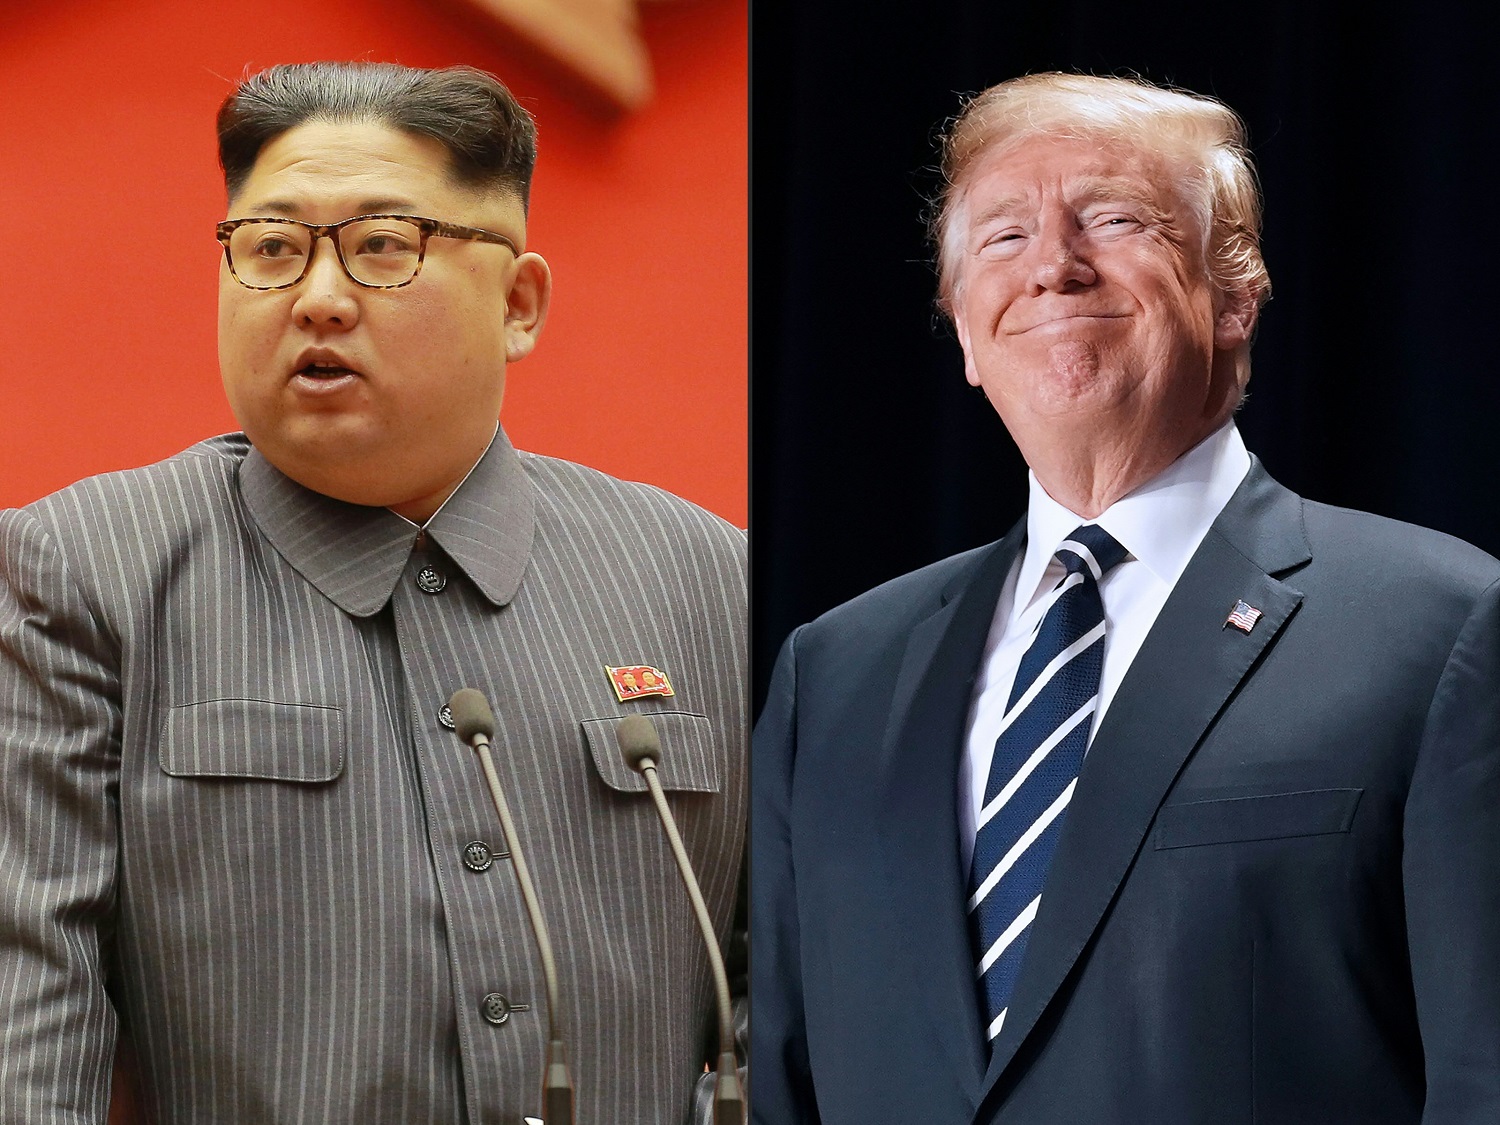 Trump announces summit with Kim Jong Un will take place in Singapore on June 12